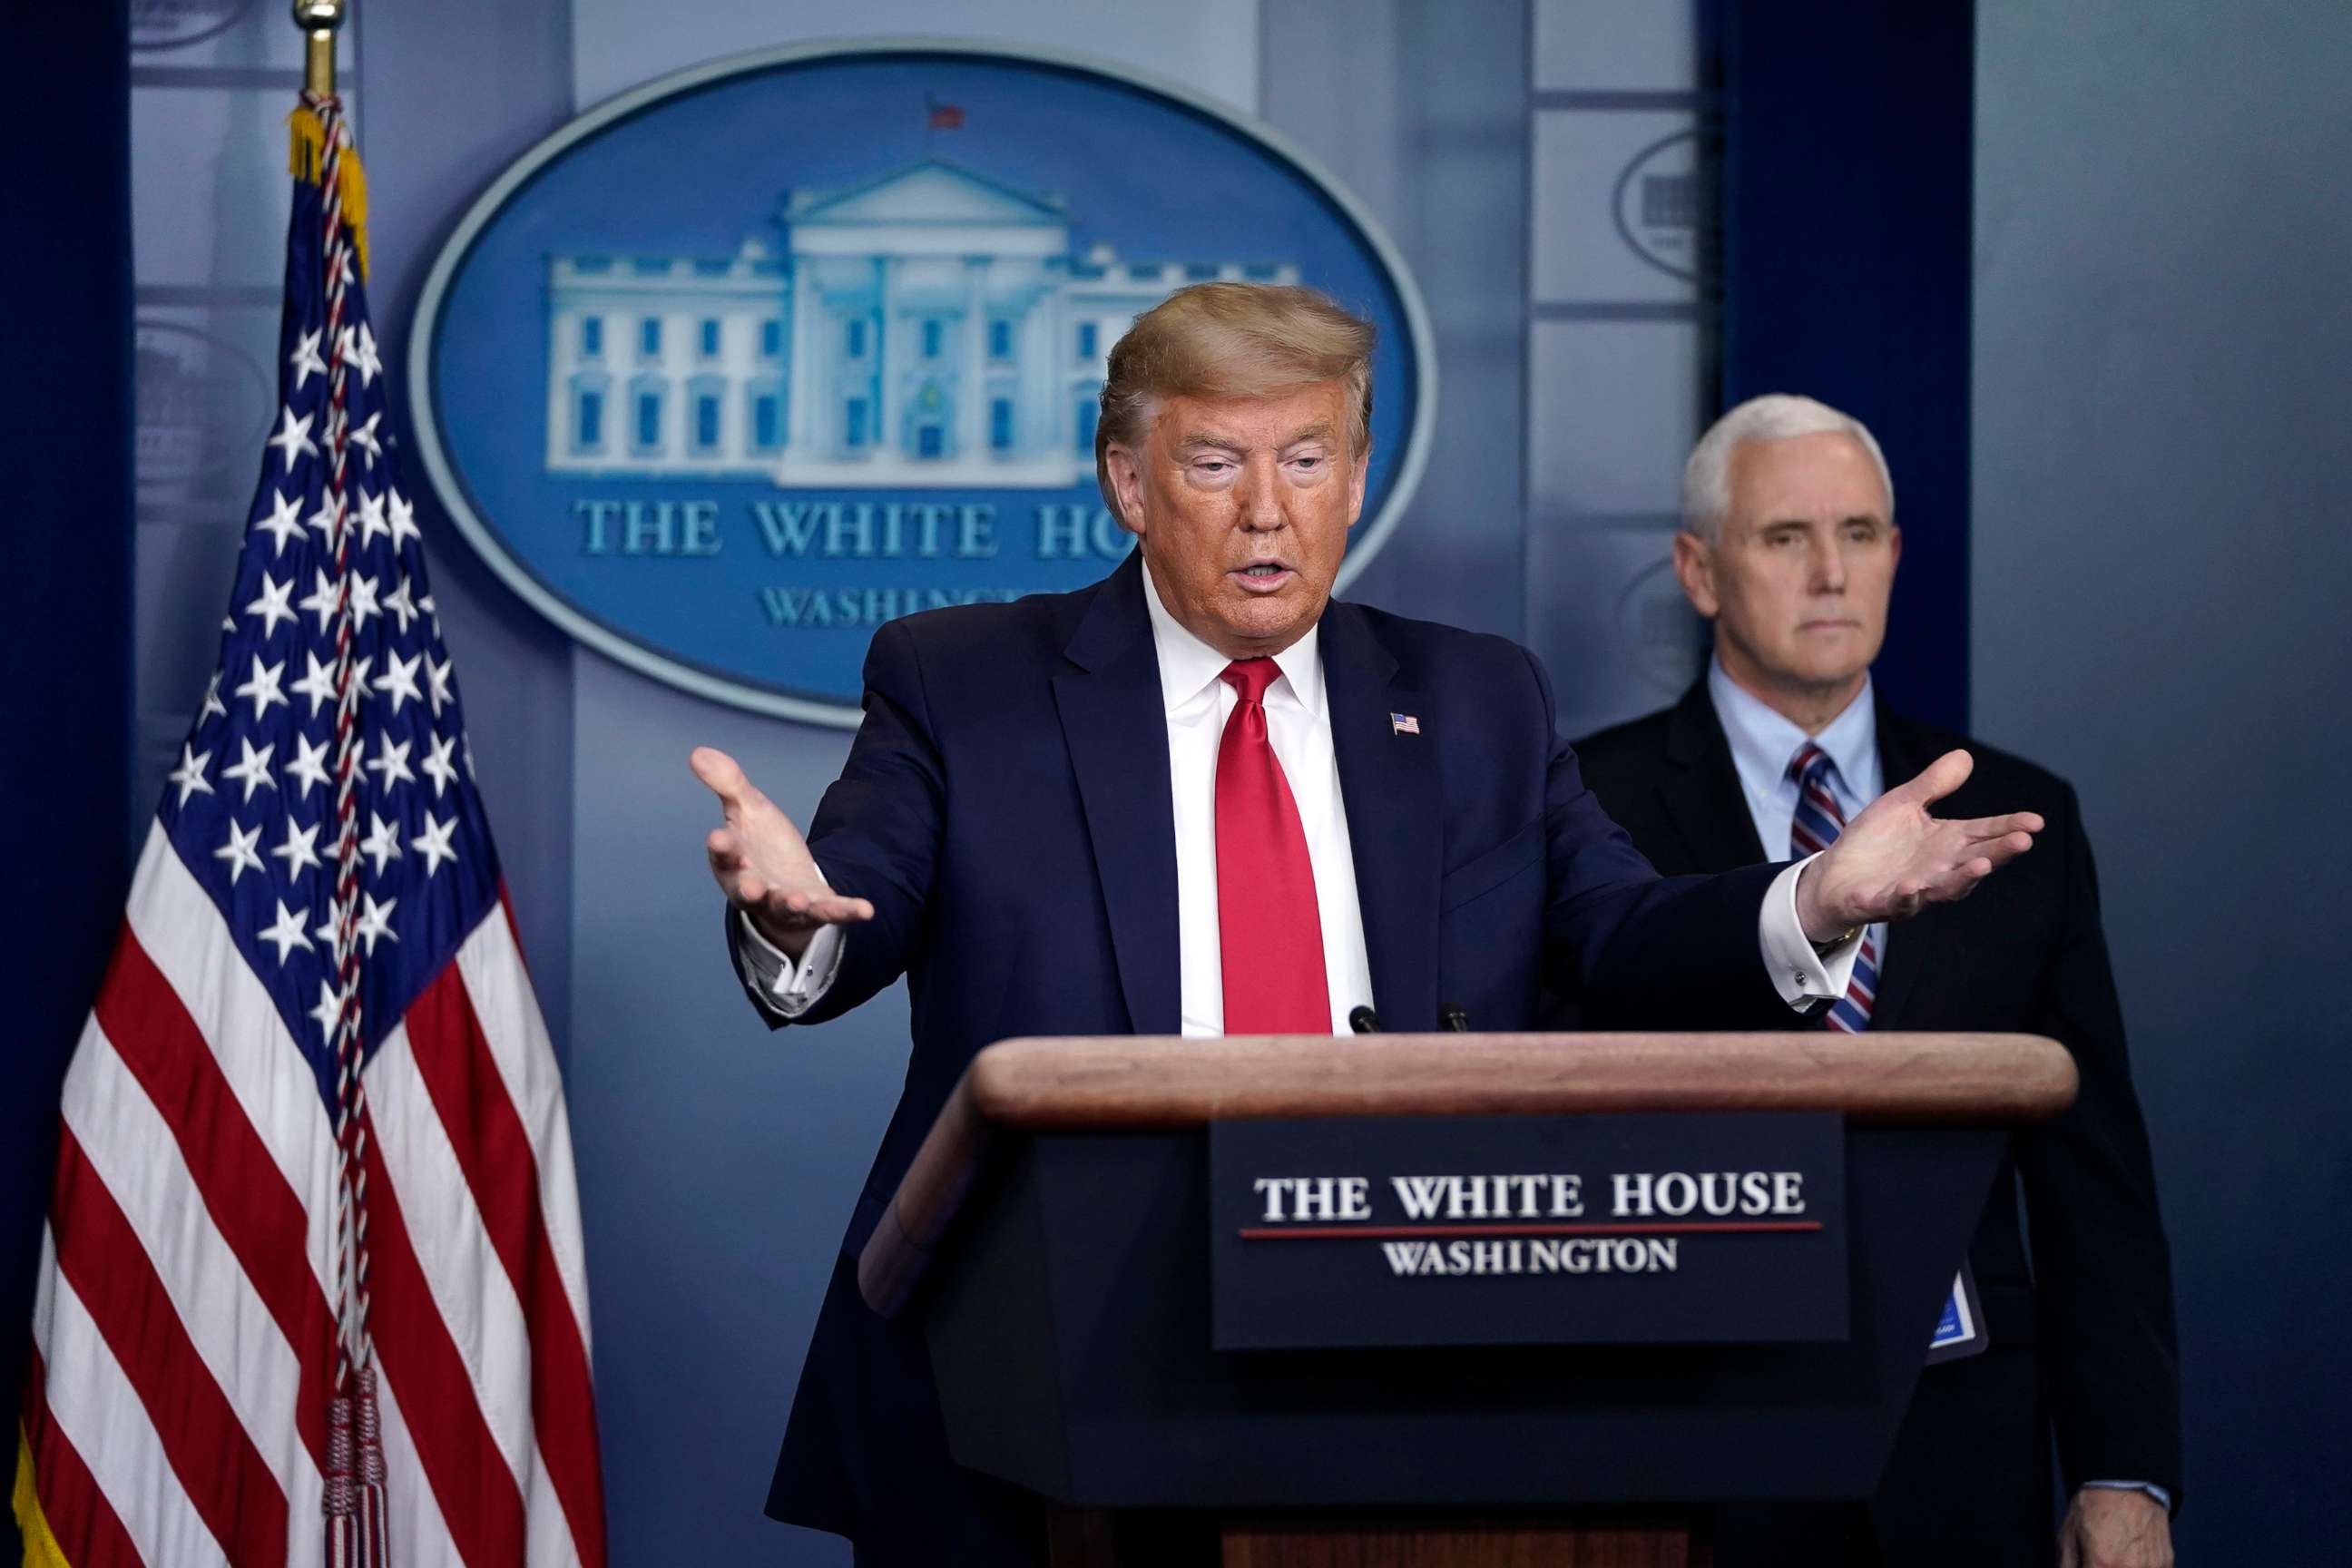 PHOTO: President Donald Trump gestures as Vice President Mike Pence looks on during a briefing on the coronavirus pandemic in the press briefing room of the White House, on March 26, 2020, in Washington.